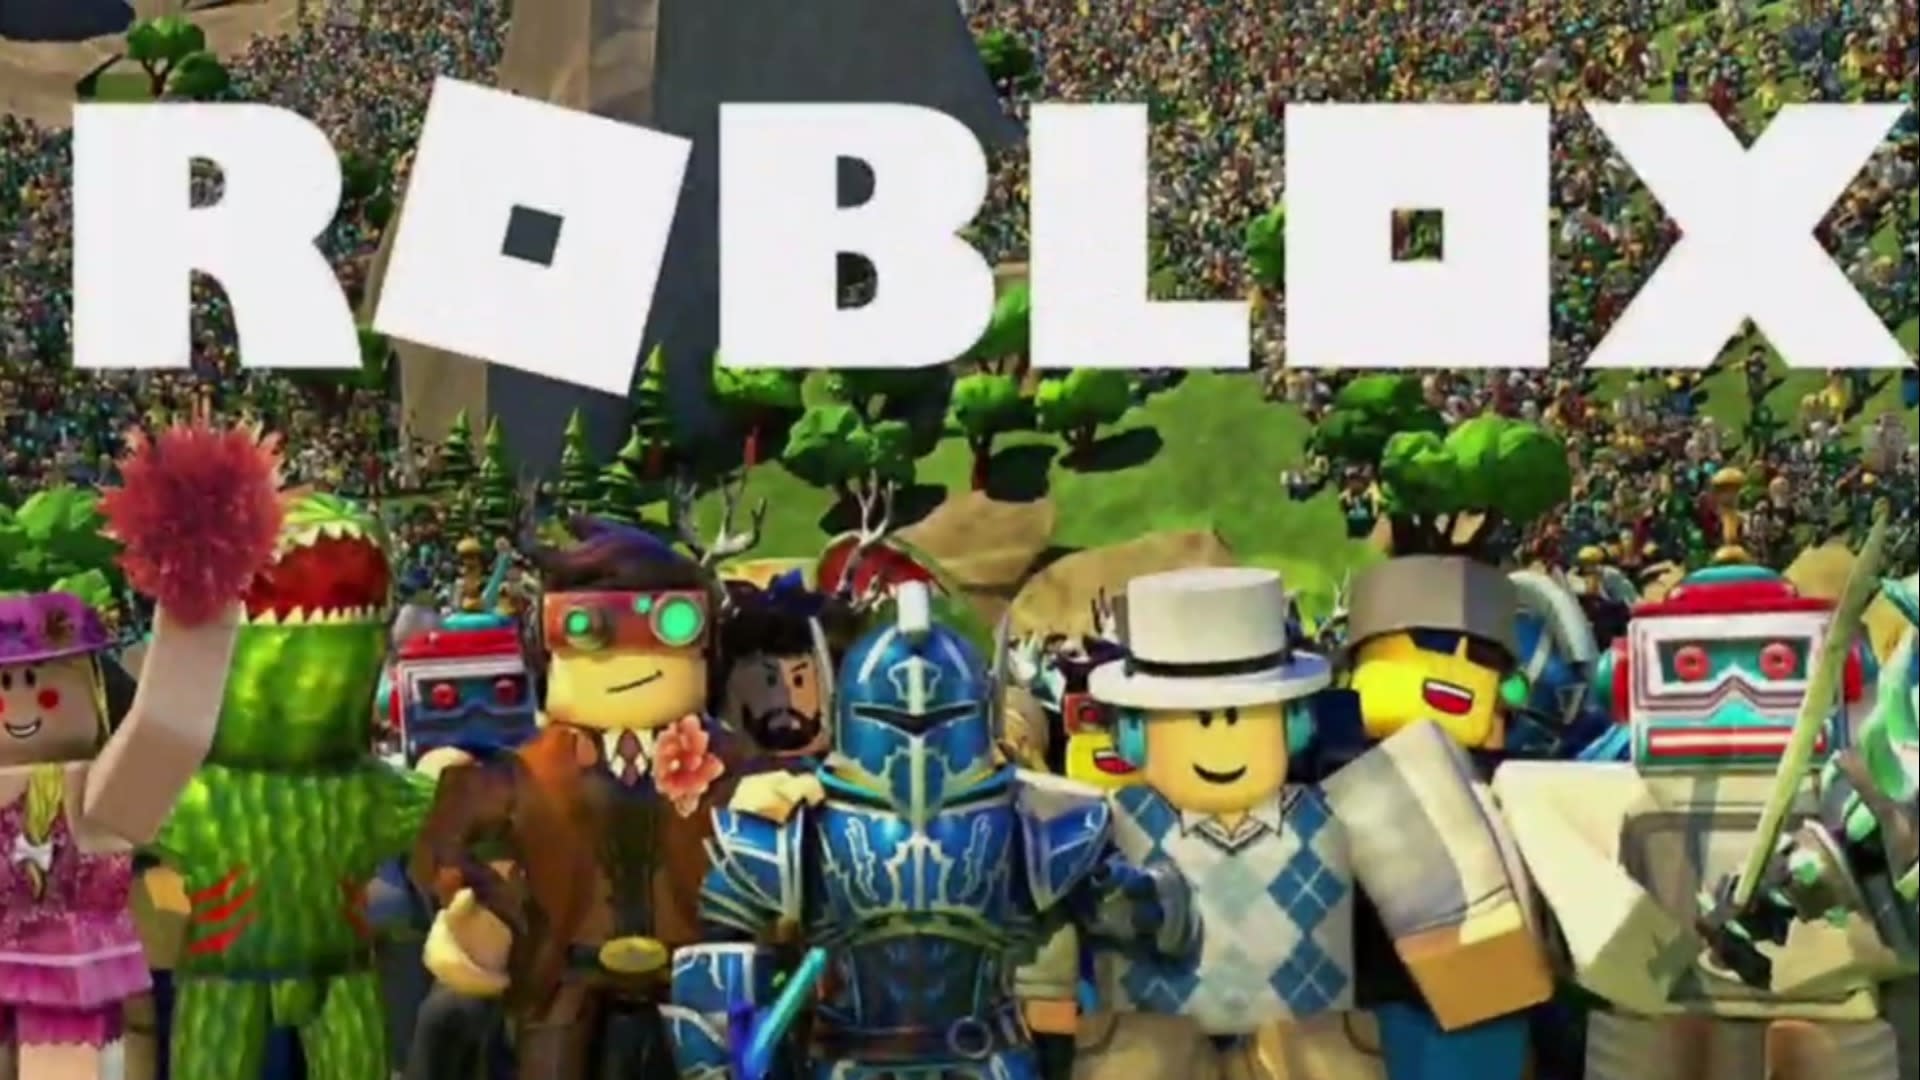 New Questions About Some Inappropriate Content On The Gaming Platform Roblox Video - new inbox roblox